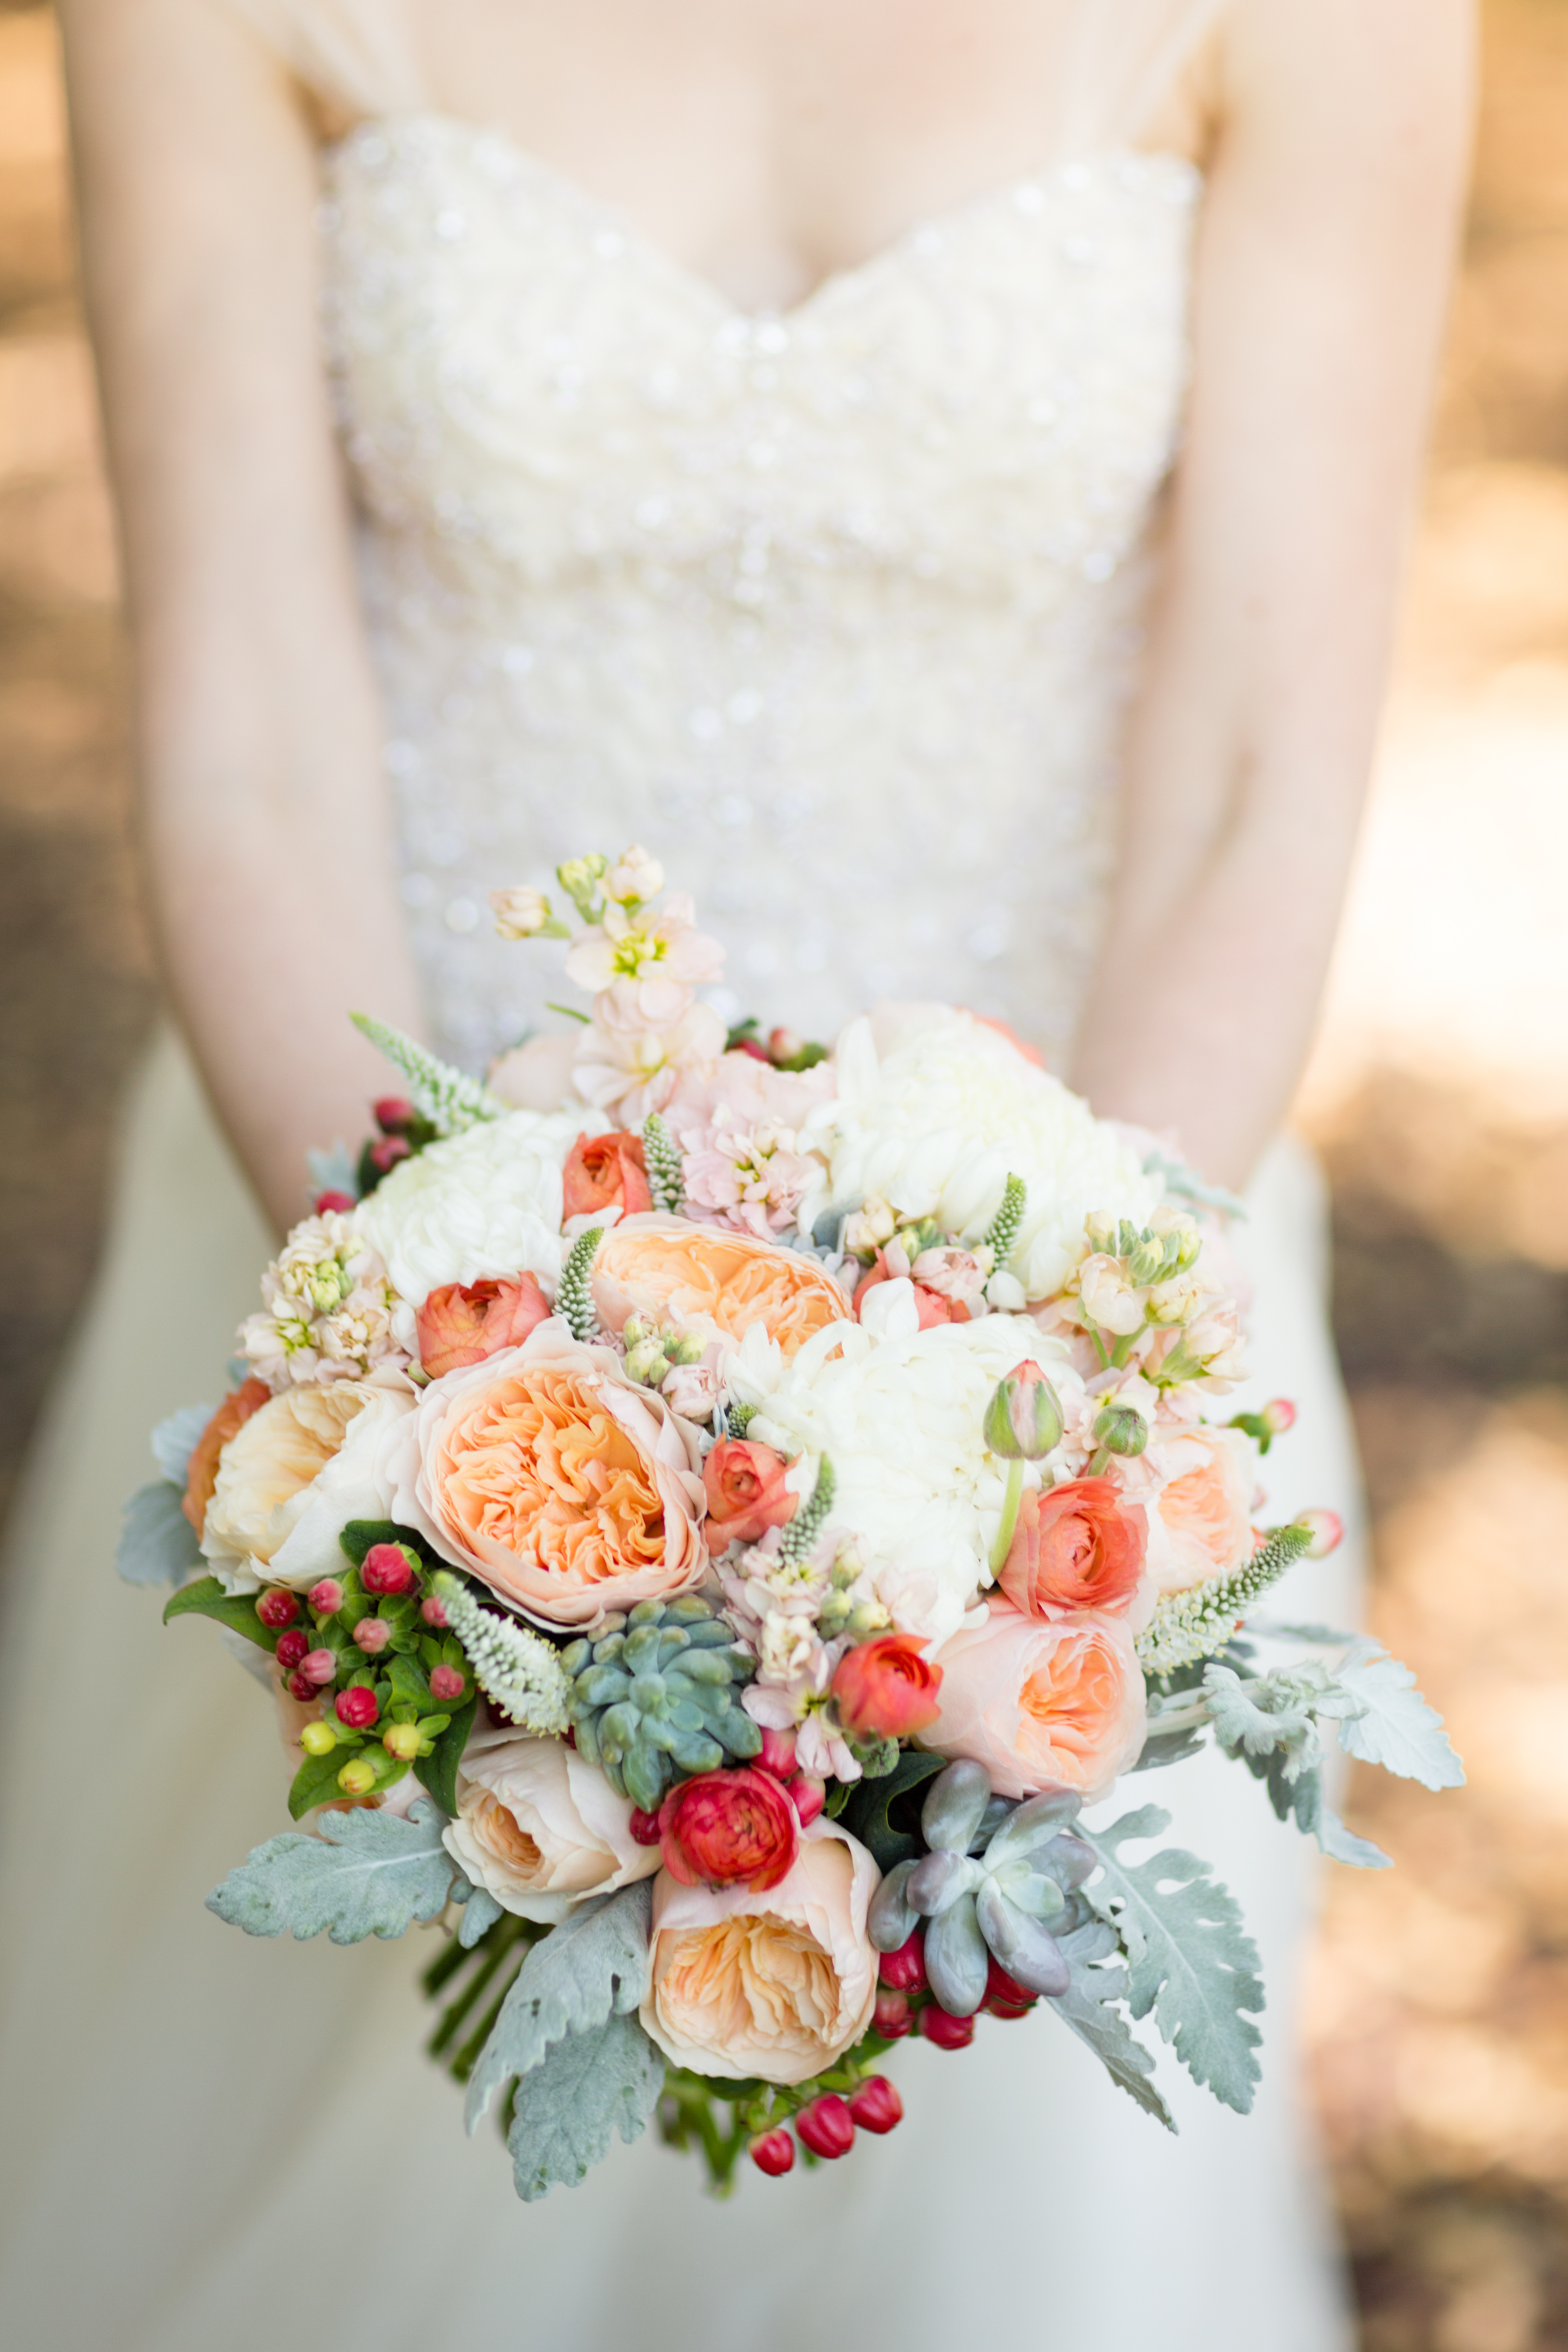 Navy | Peach | Sky Blue | Boho | Oak Tree | Outdoor wedding | Floral Crown | Palo Alto | Olivia Smartt Photography | Bella Notte Events Planning and Design